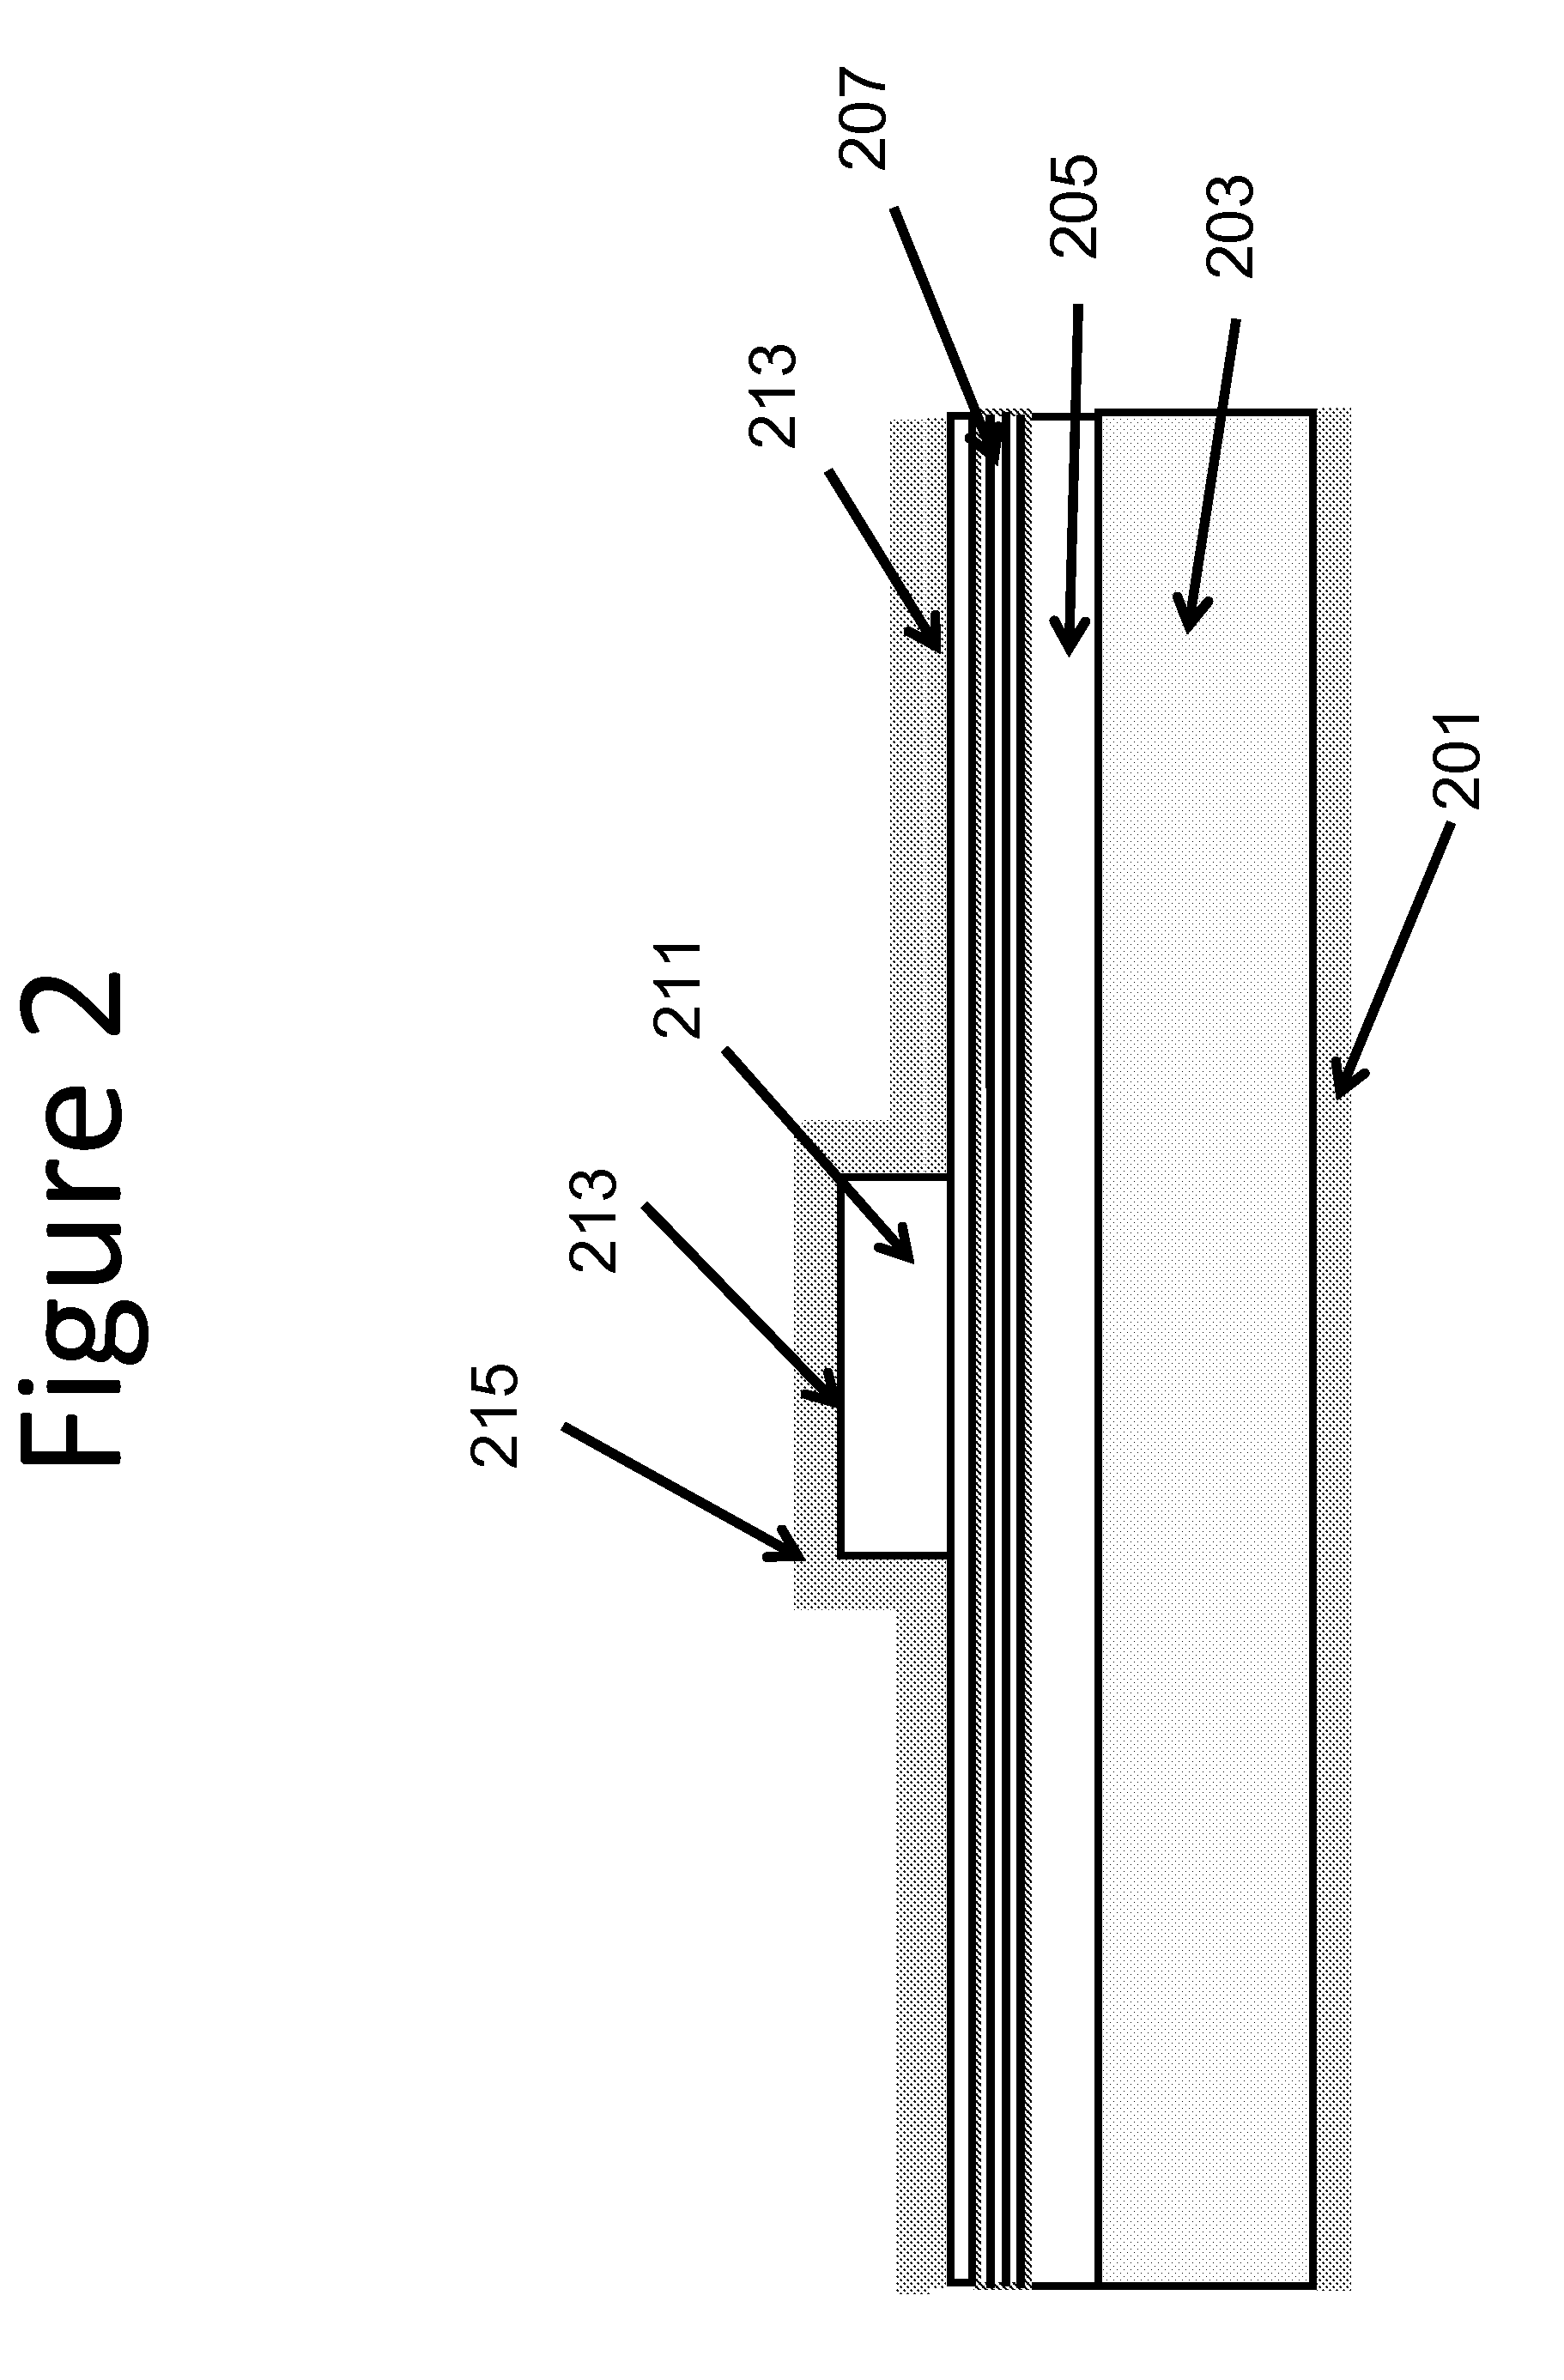 Growth Structures and Method for Forming Laser Diodes on  or Off Cut Gallium and Nitrogen Containing Substrates